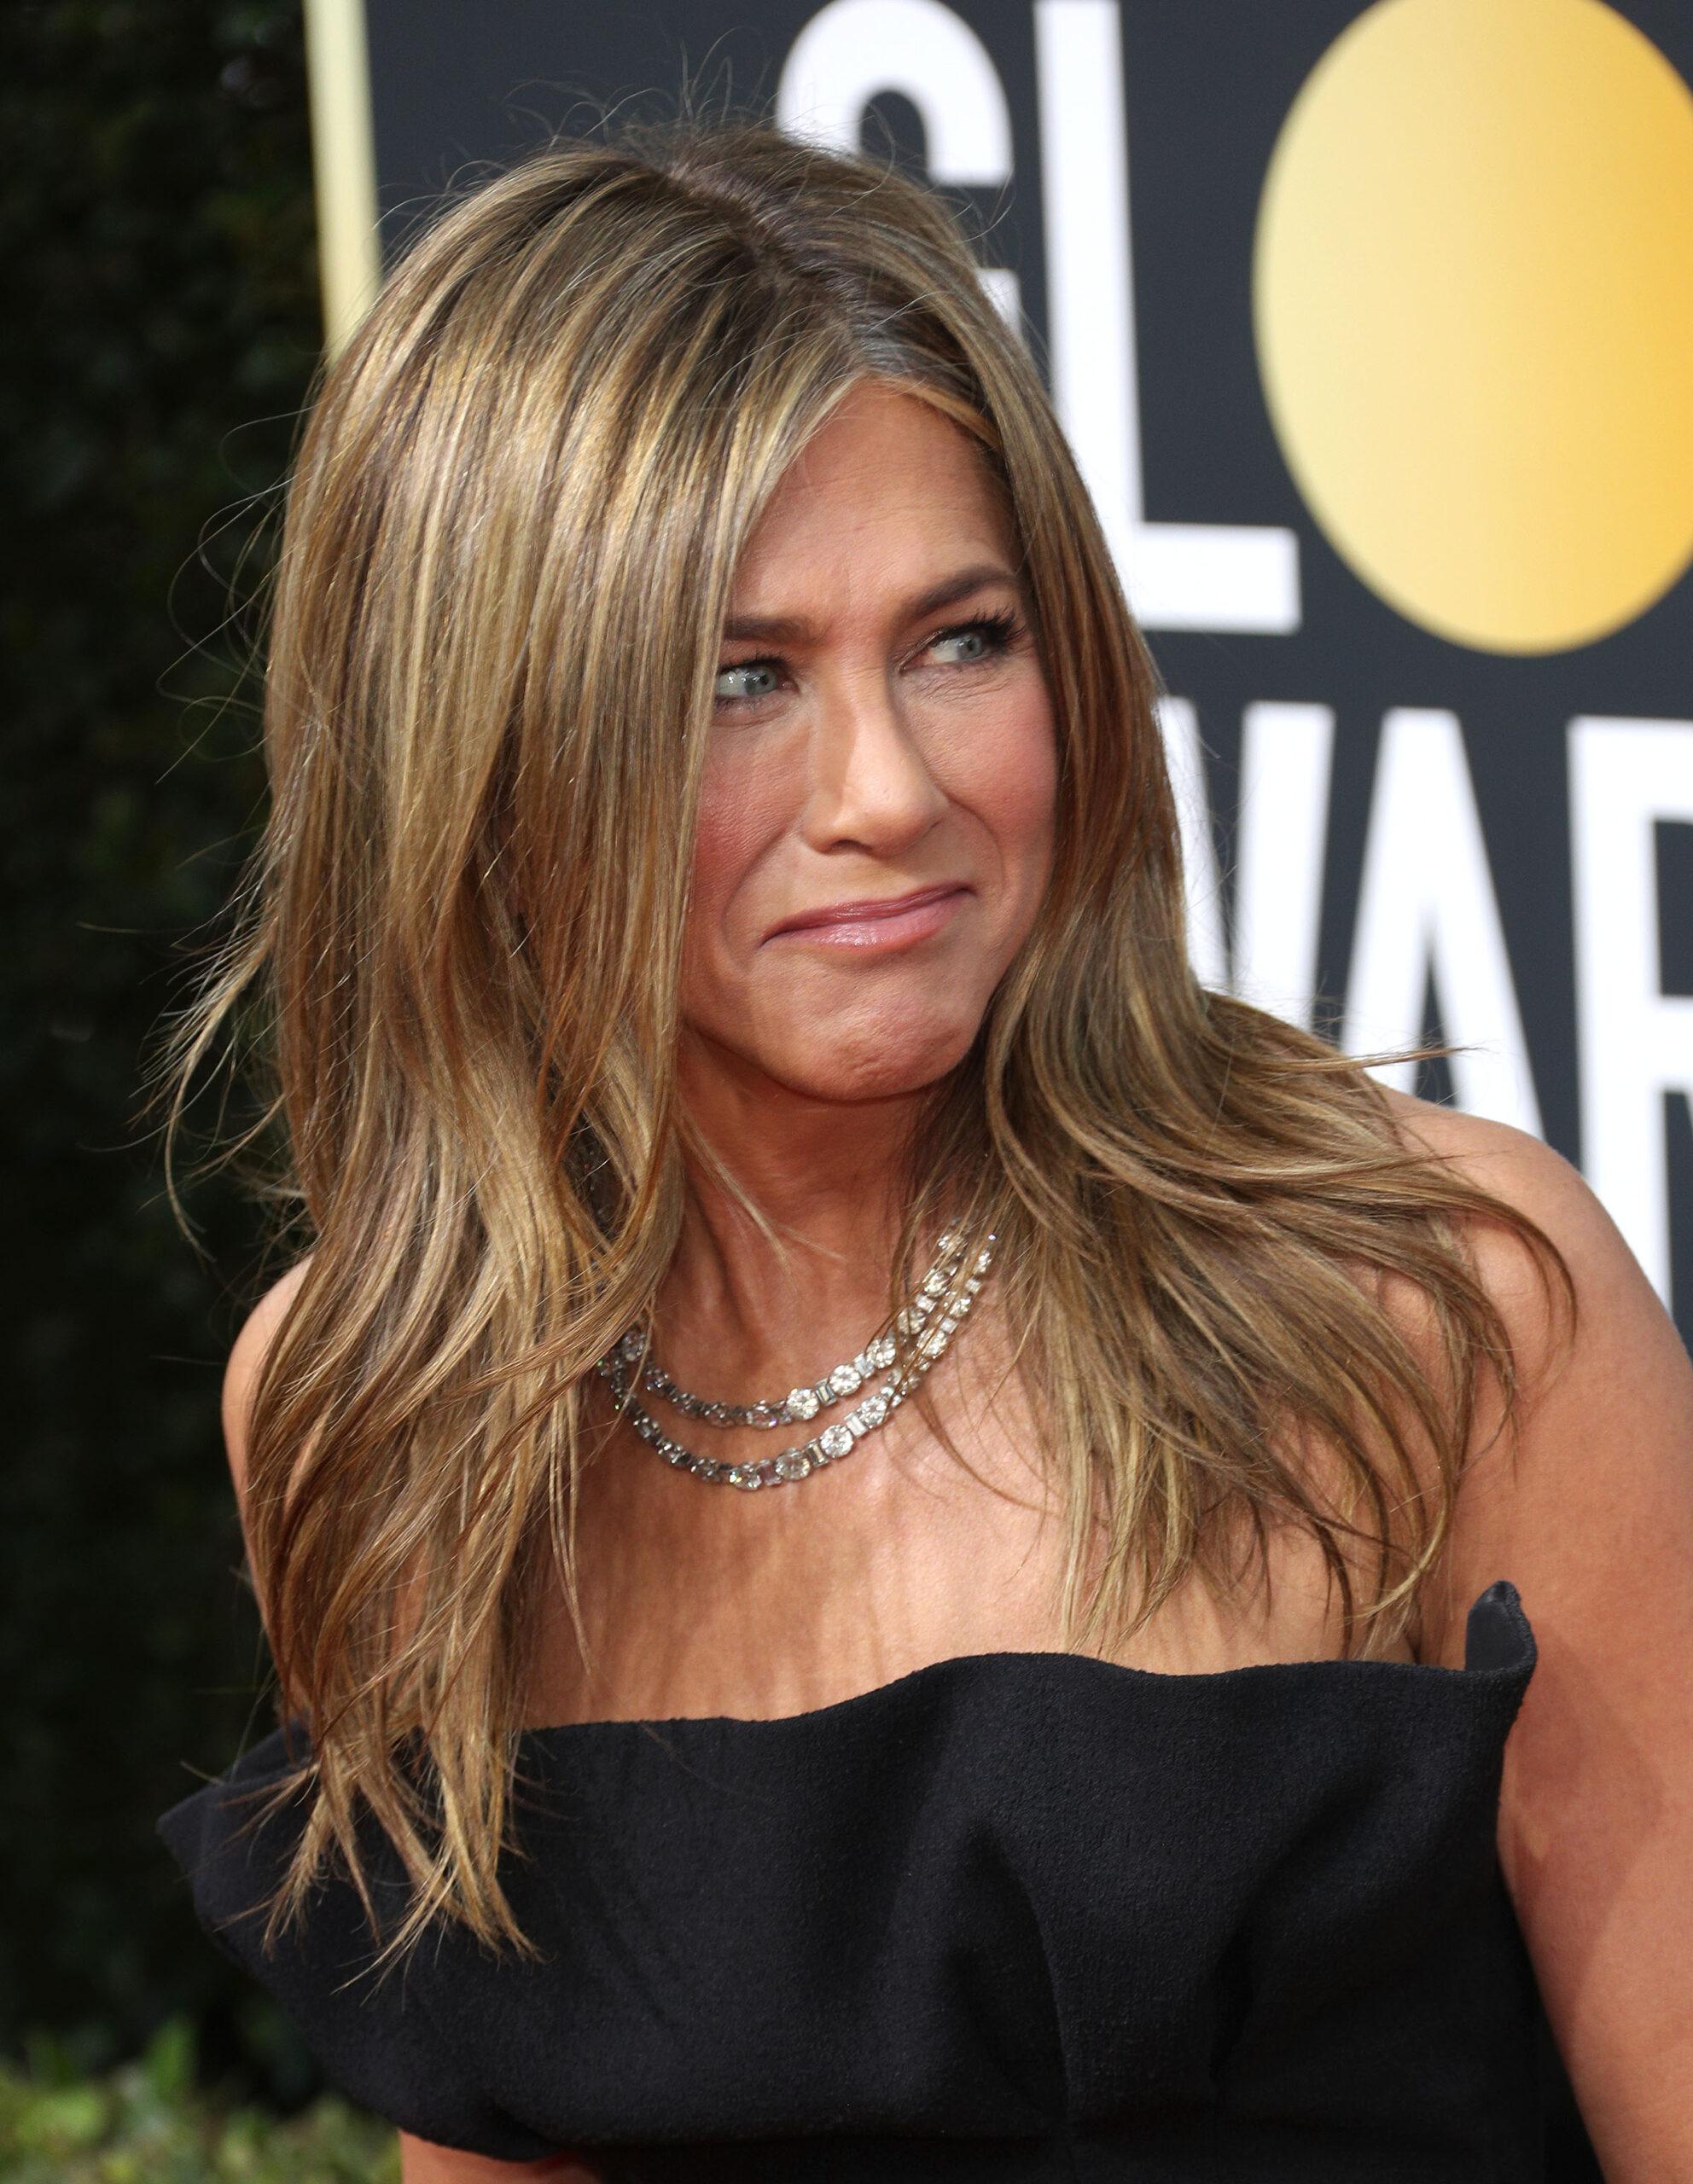 Jennifer Aniston at the 77th Annual Golden Globe Awards - Arrivals